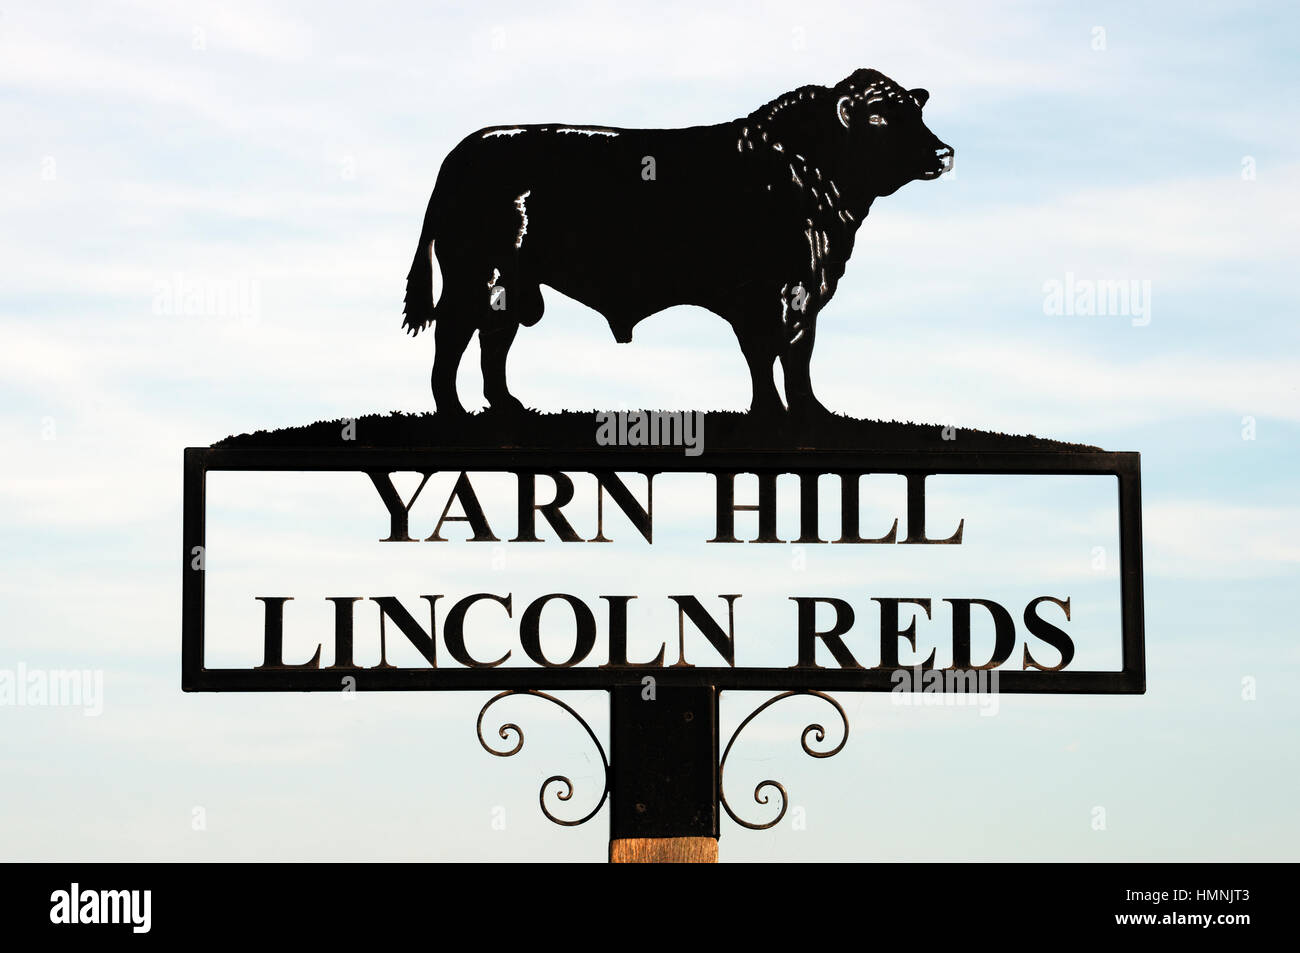 Yarn Hill Lincoln Reds cattle sign Stock Photo